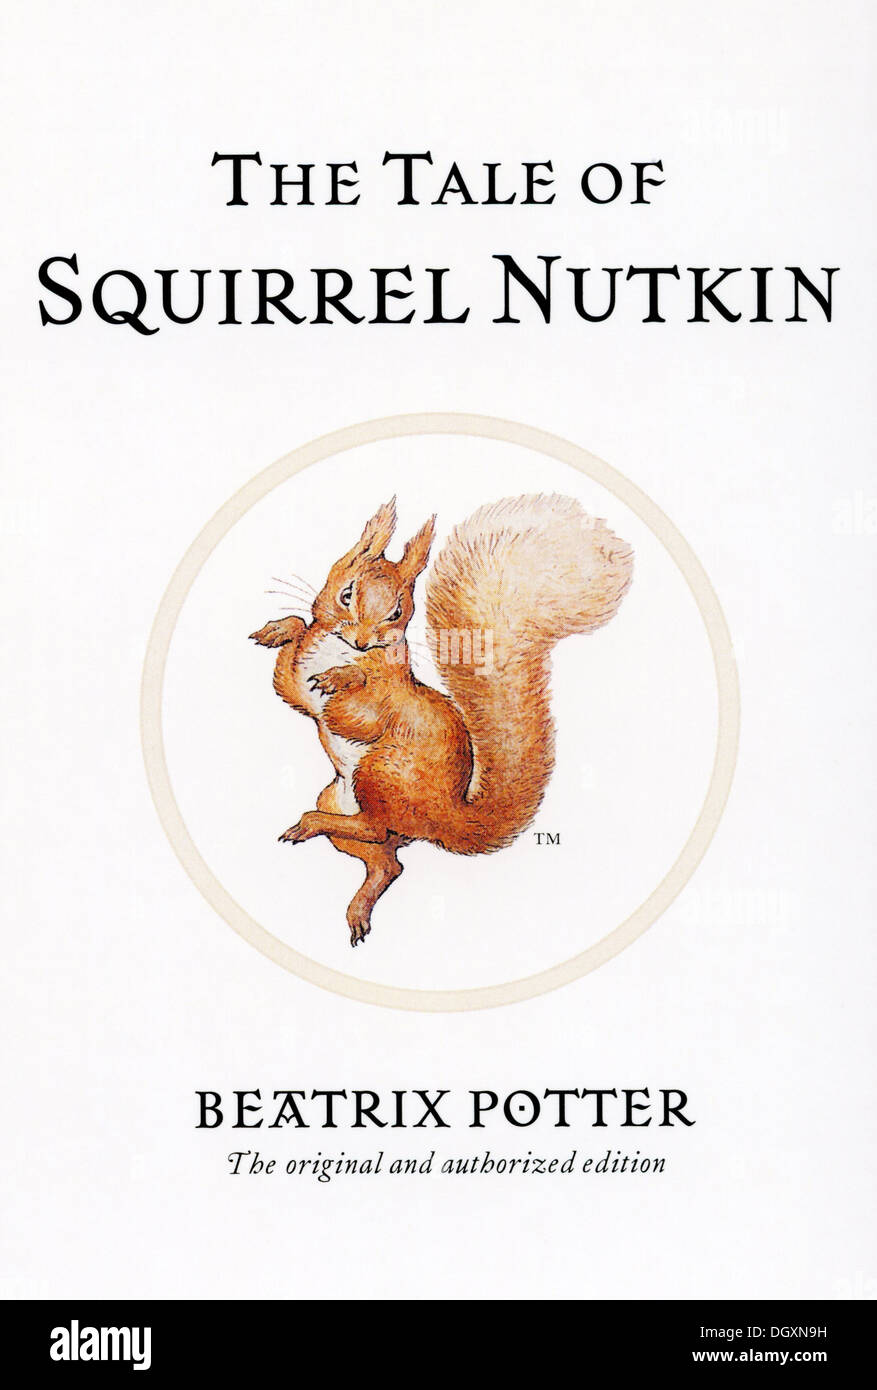 Beatrix Potter - The Tale of Squirrel Nutkin book cover, 1903 Stock Photo